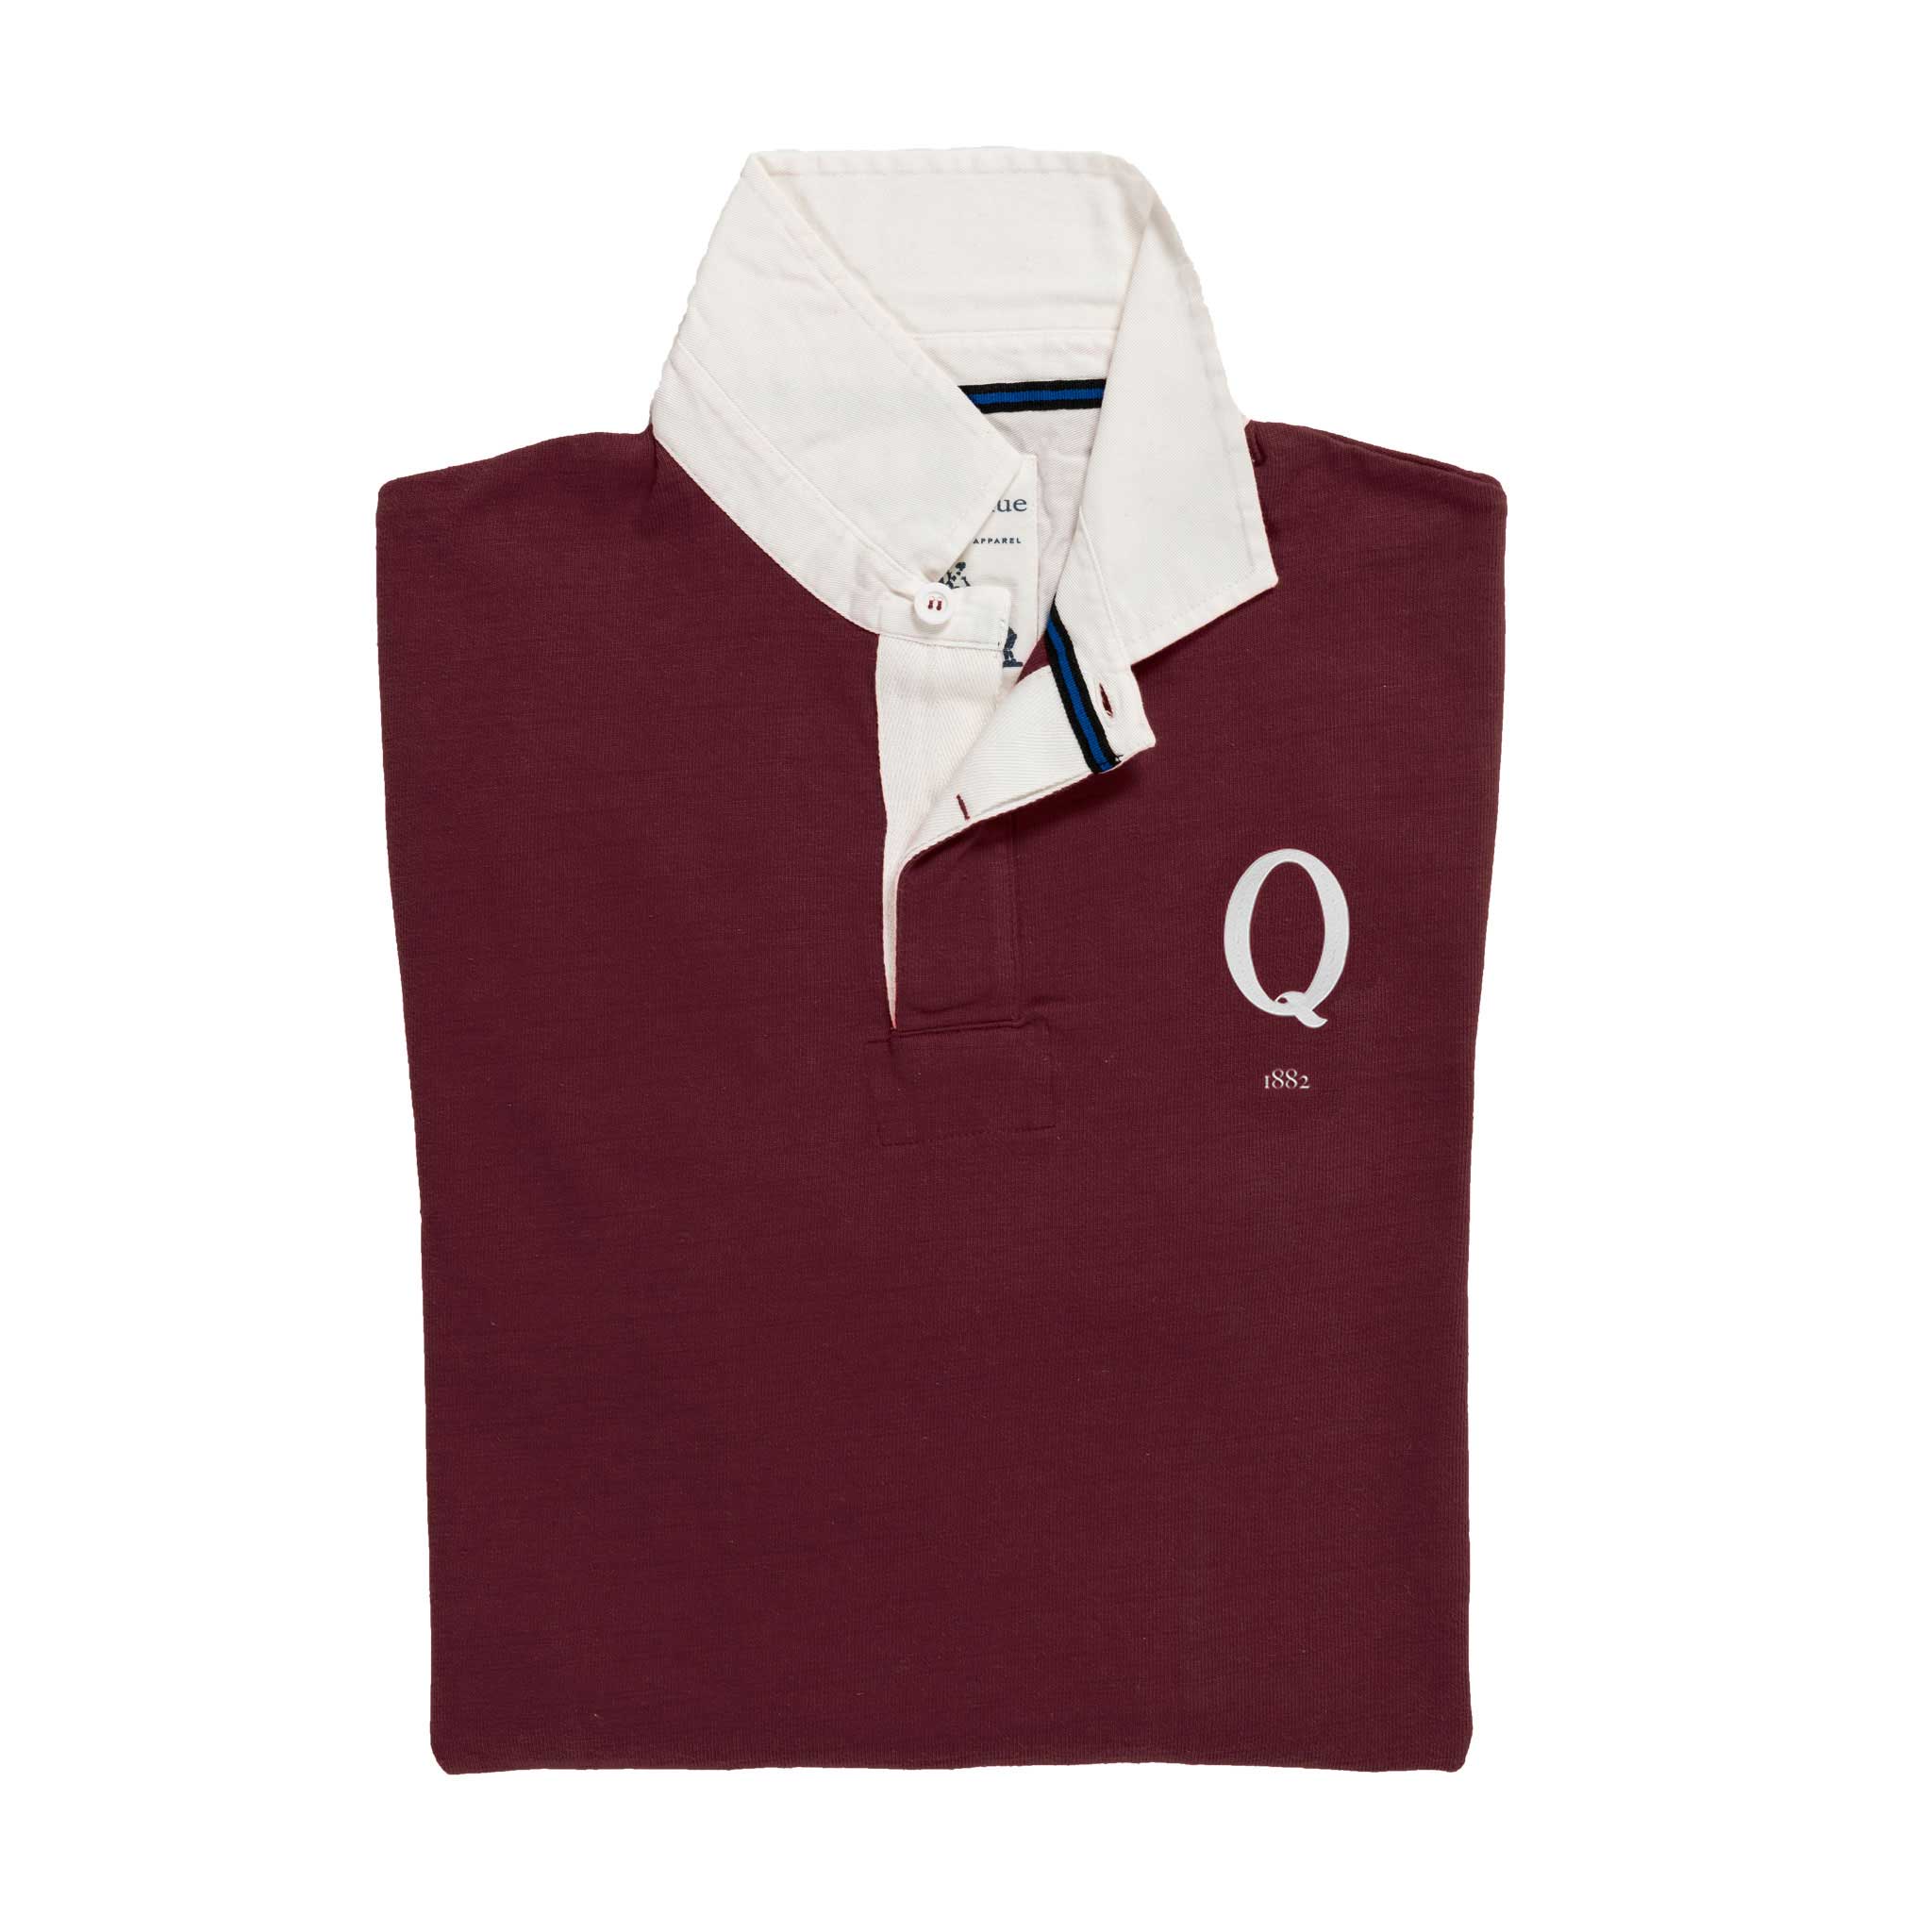 Queensland 1882 Rugby Shirt_Folded